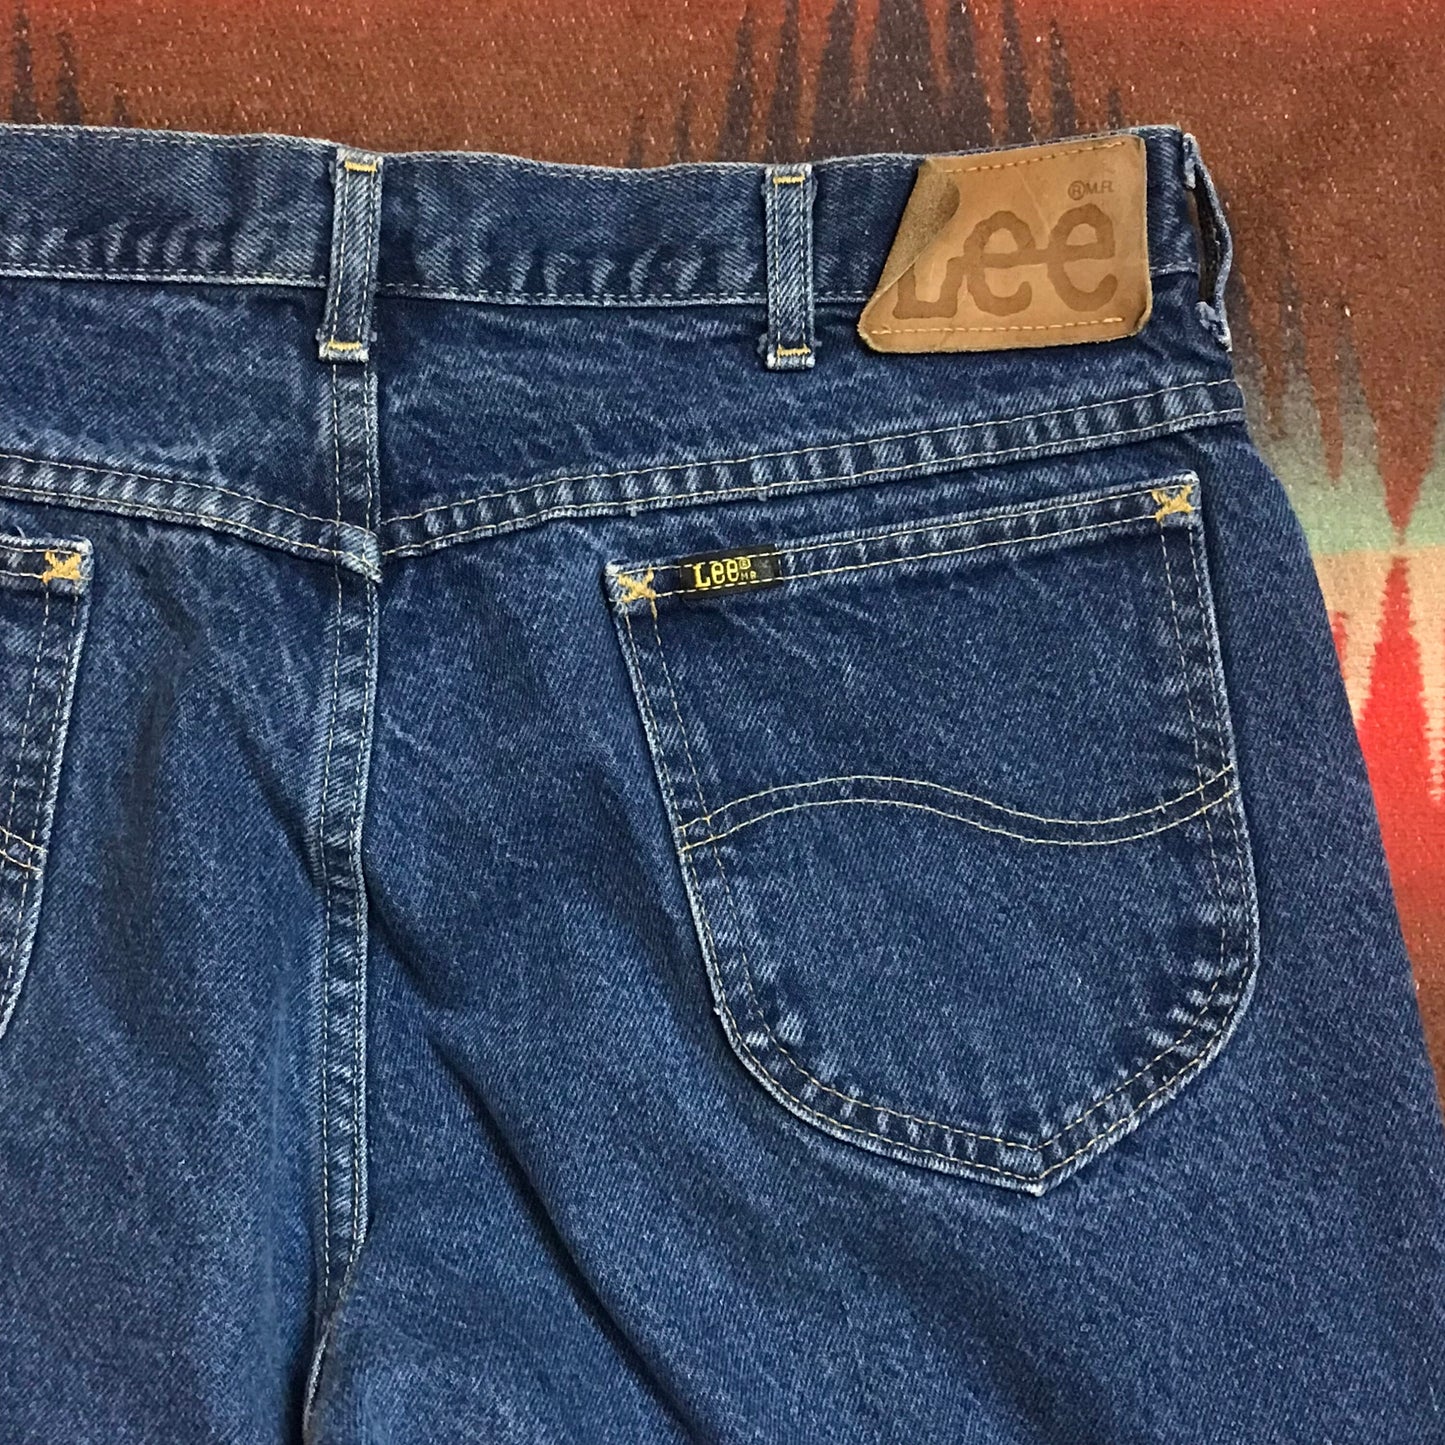 1970s Lee Riders Dark Wash Jeans Made in USA Size 34x29